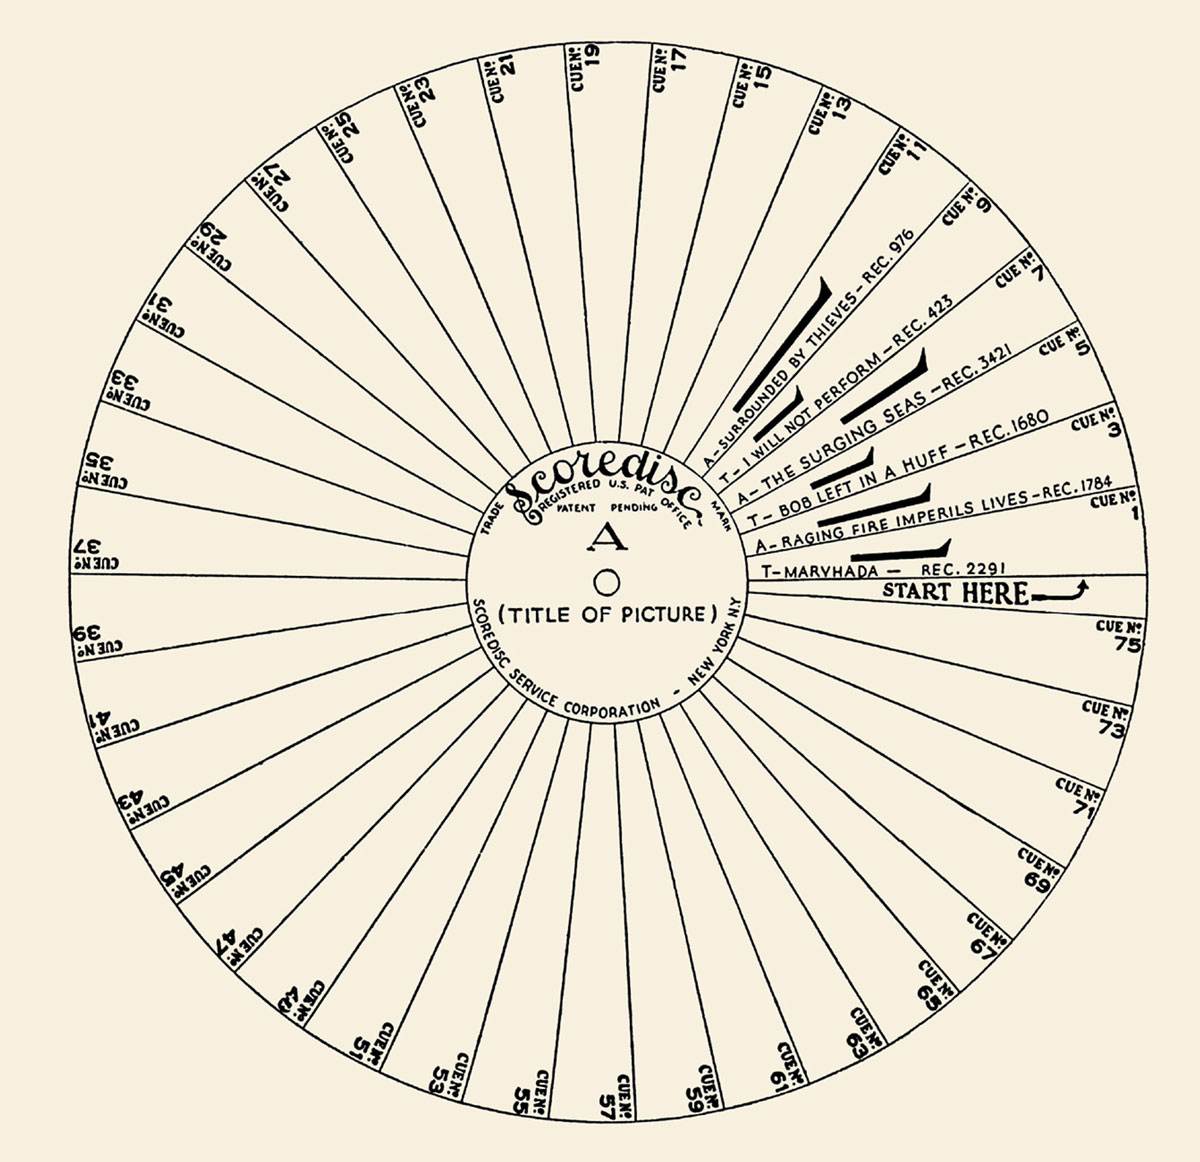 A drawing of a Scoredisc non-sync record cueing disc circa 1929. 